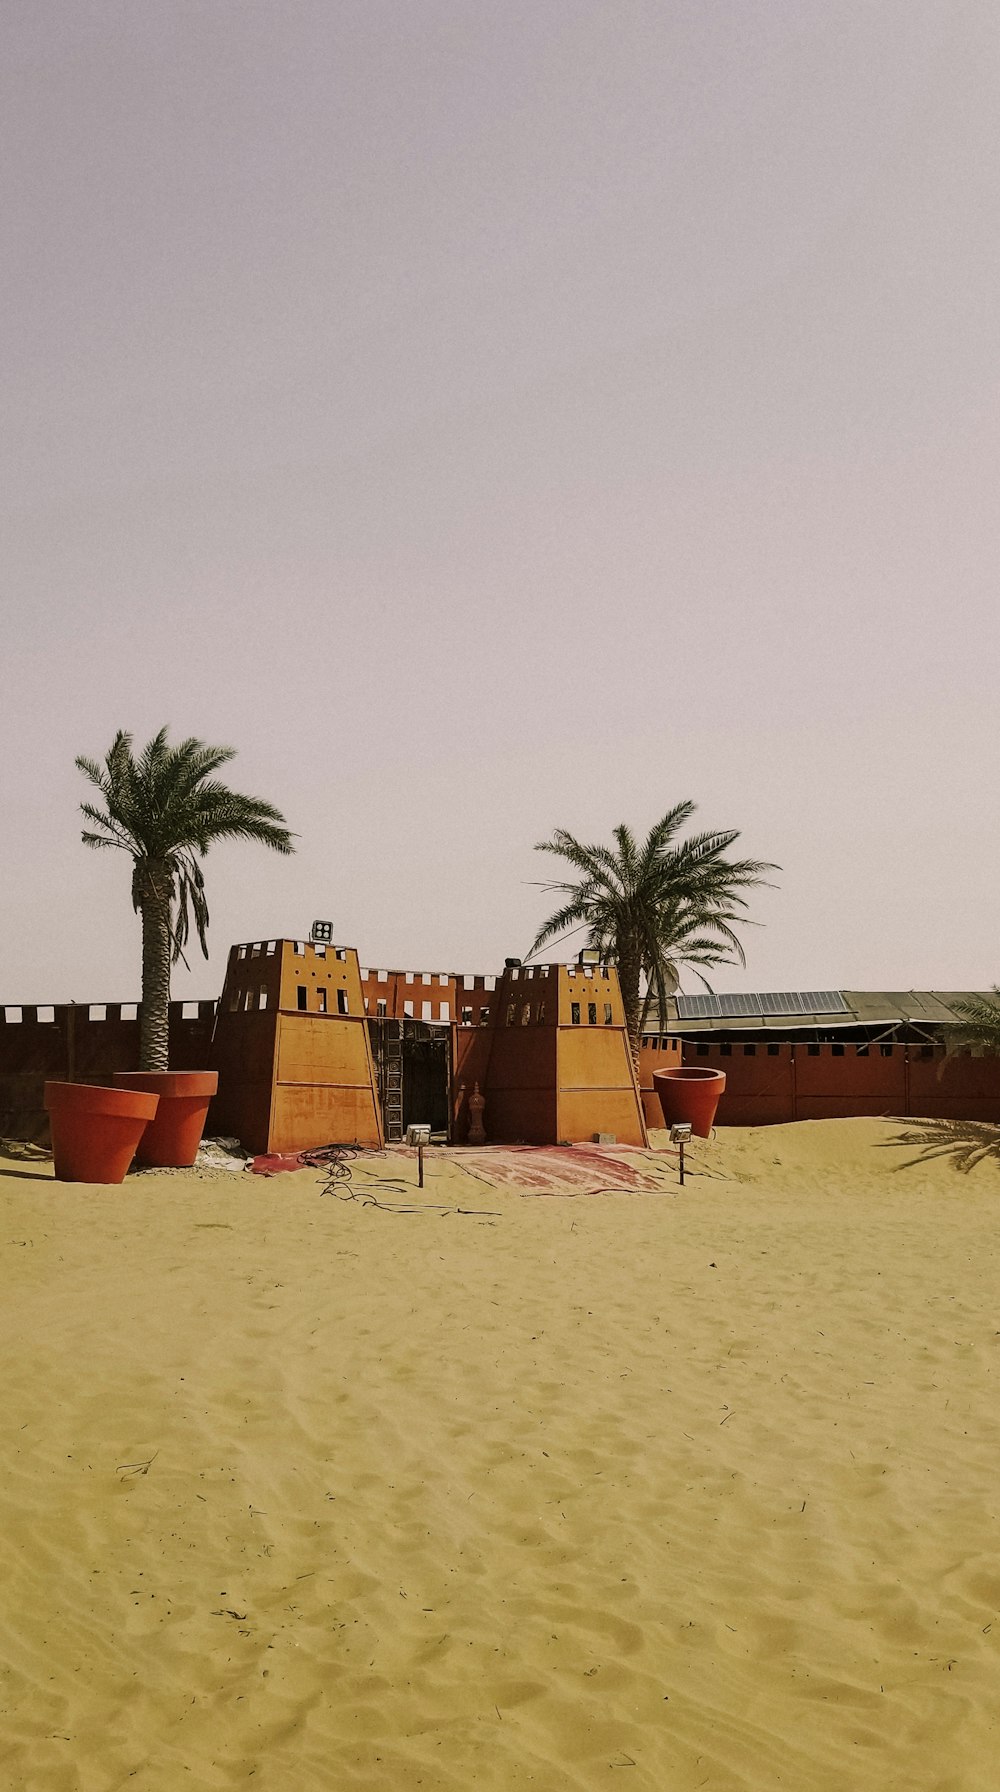 a desert scene with a building and palm trees